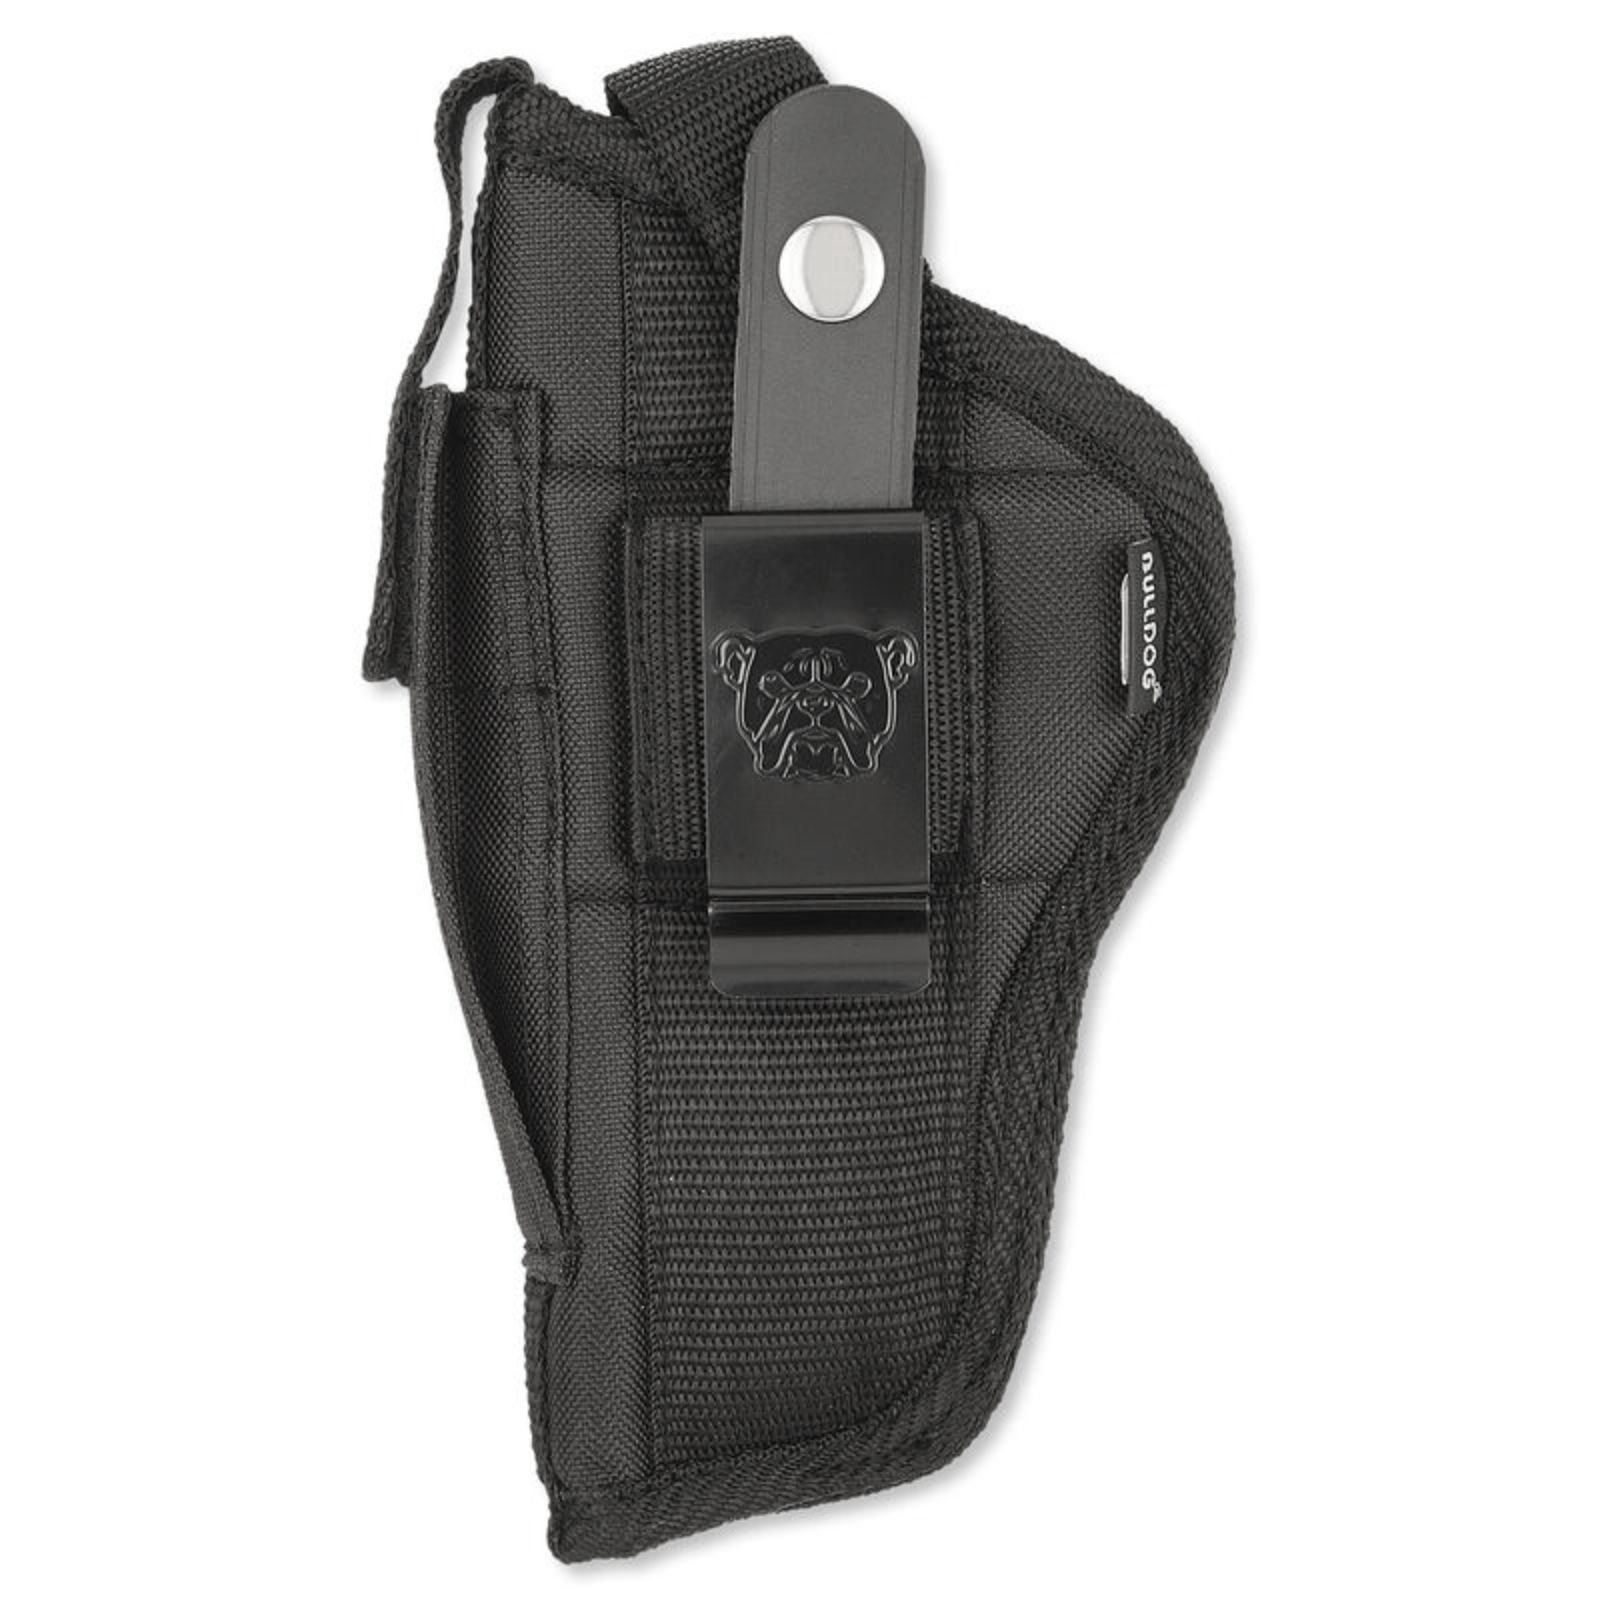 With 3" Barrel 6 SHOT Bulldog Gun holster For Smith & Wesson 66,547,586,629 